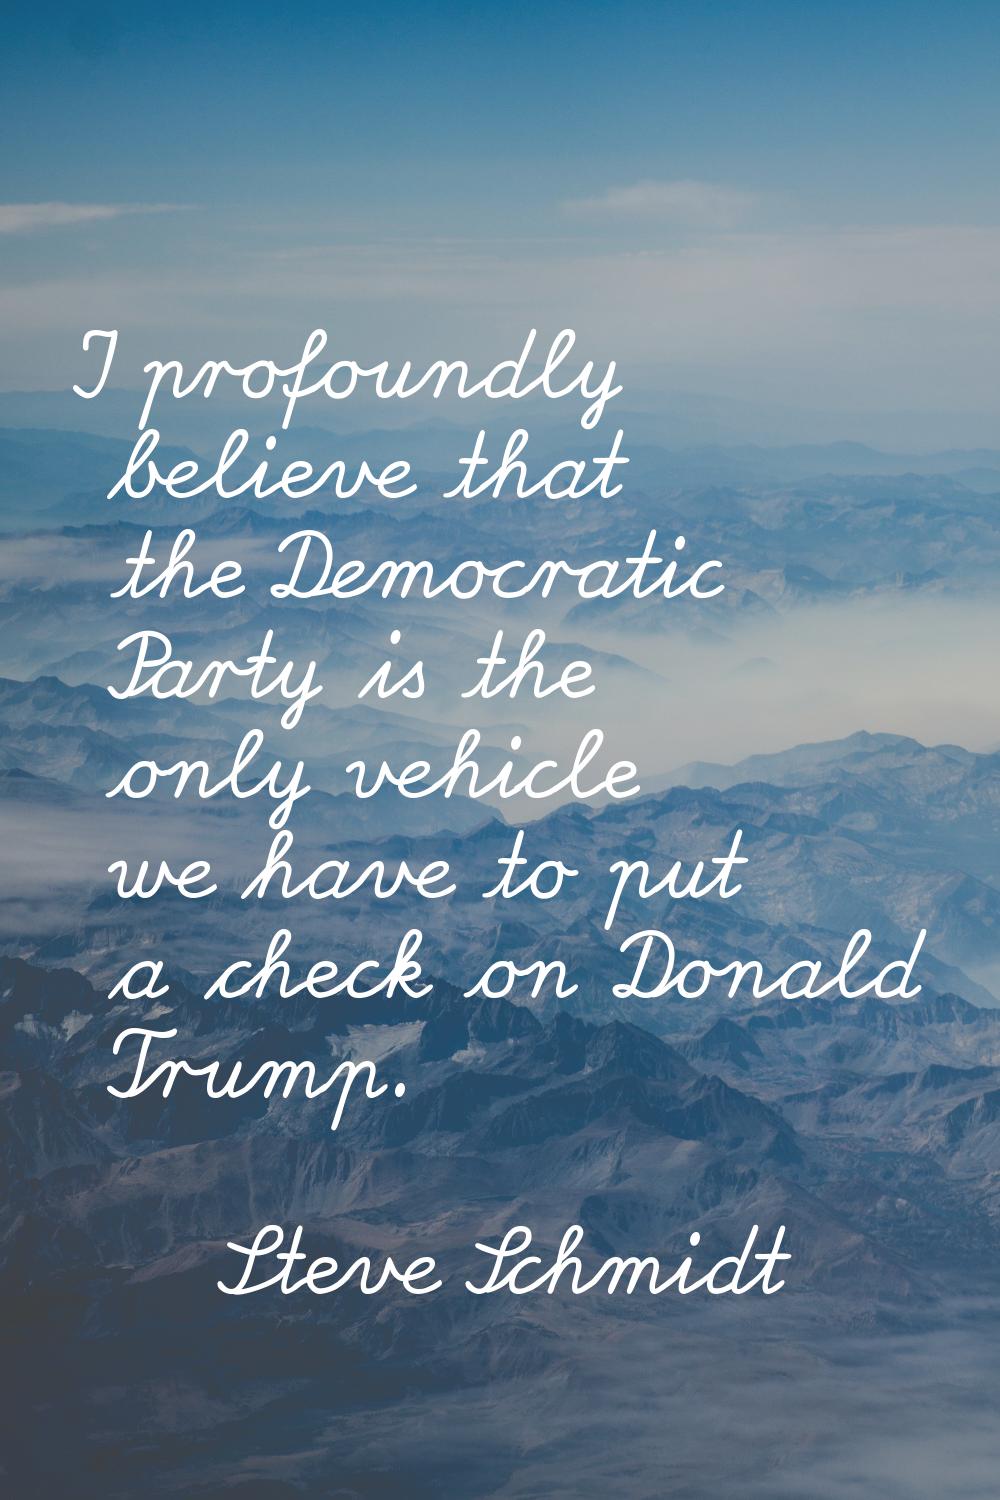 I profoundly believe that the Democratic Party is the only vehicle we have to put a check on Donald